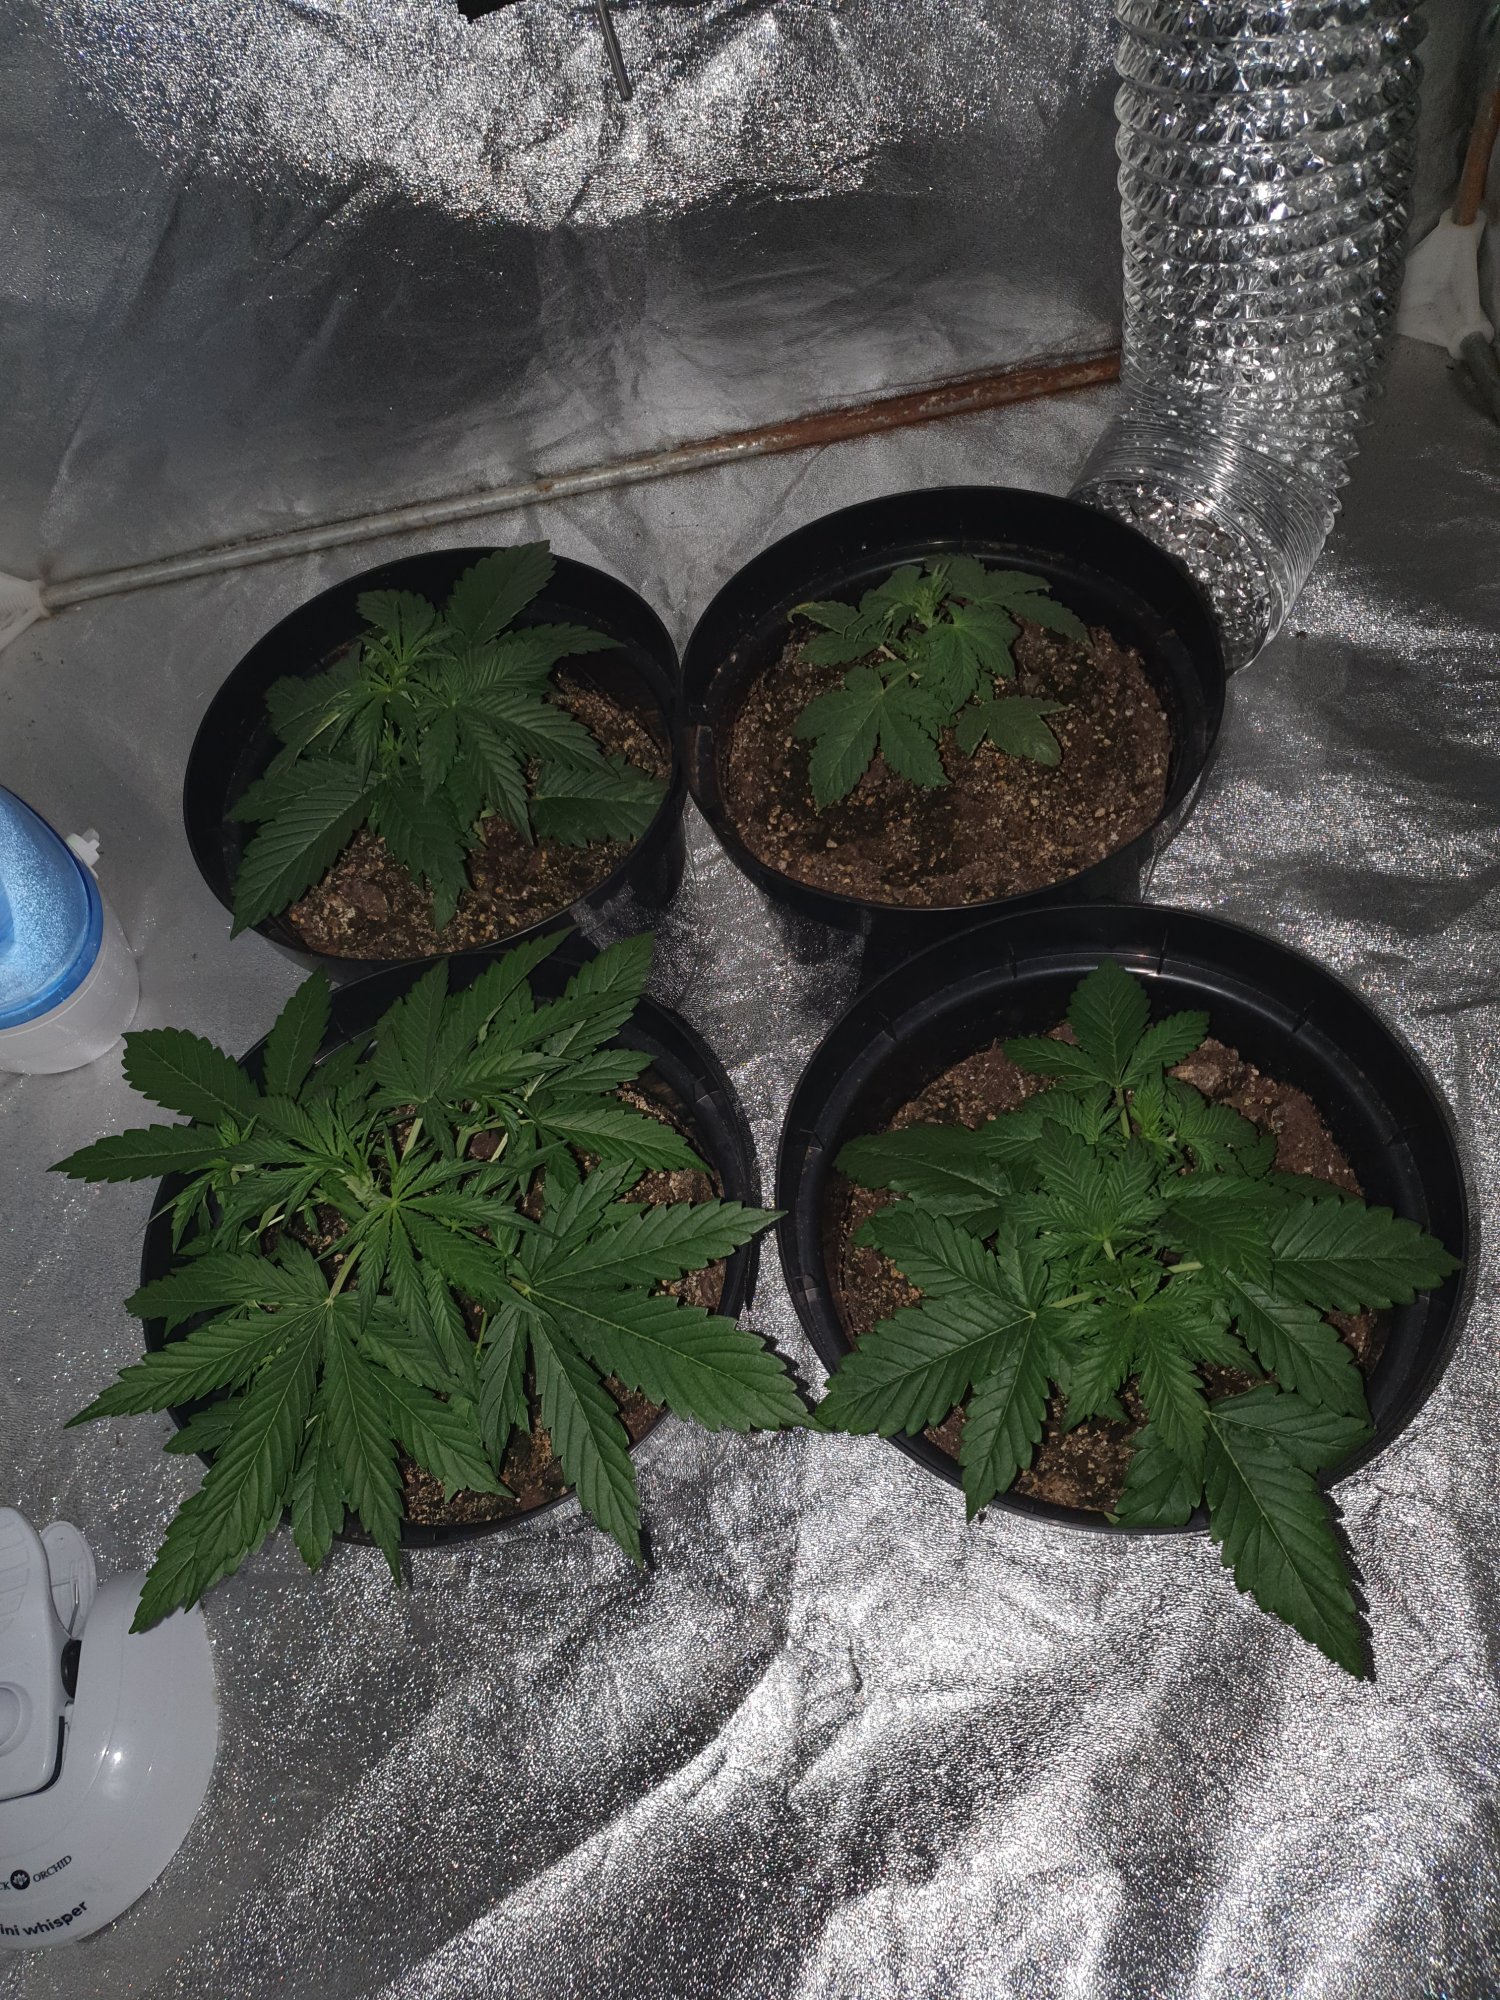 How are my 2 week old autoflowers doing